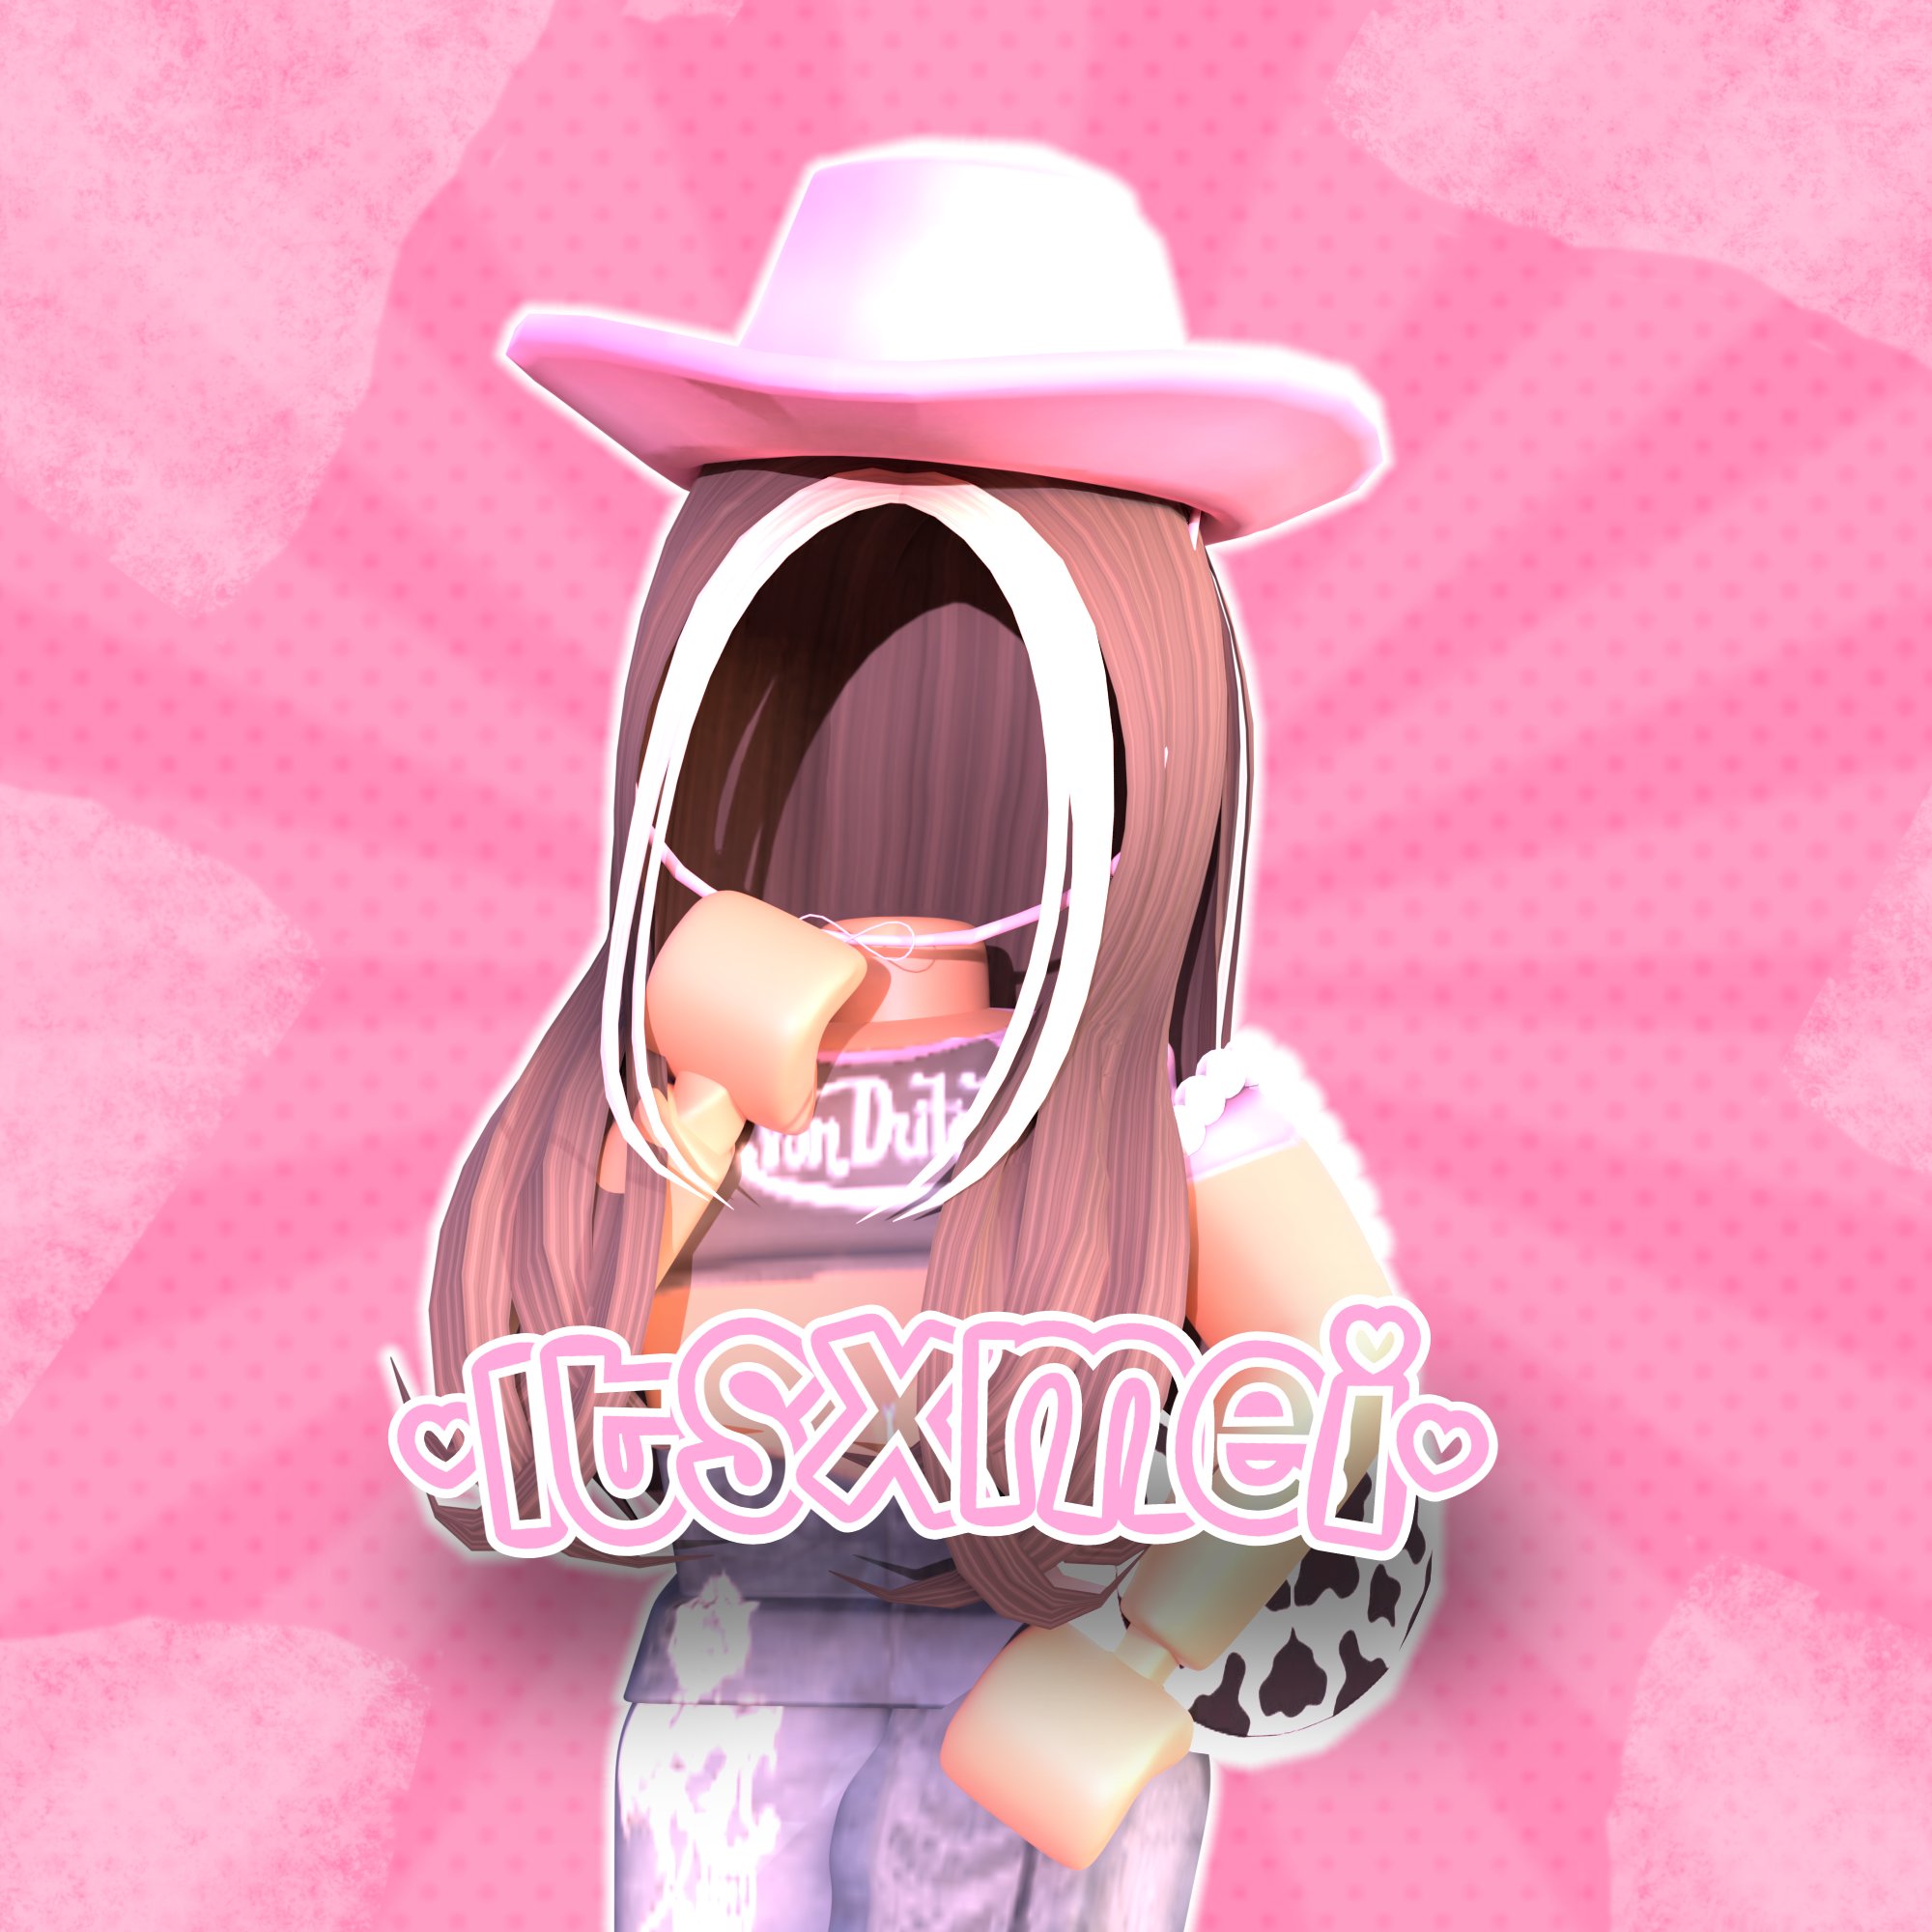 mei on X: hi! I'm a small roblox gfx artist :)) My commissions are open so  dm me if you want a gfx!!, prices